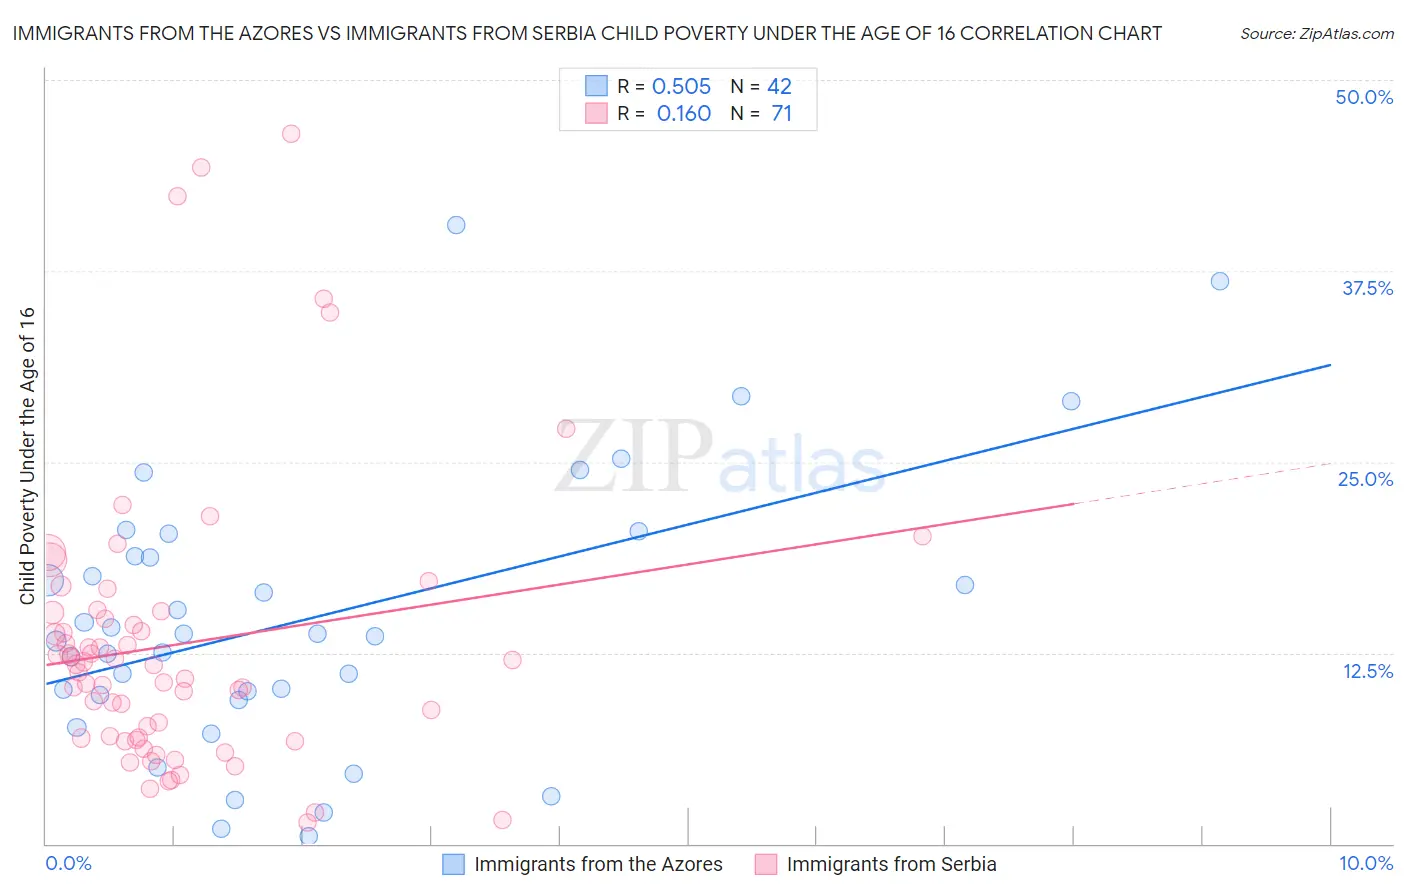 Immigrants from the Azores vs Immigrants from Serbia Child Poverty Under the Age of 16